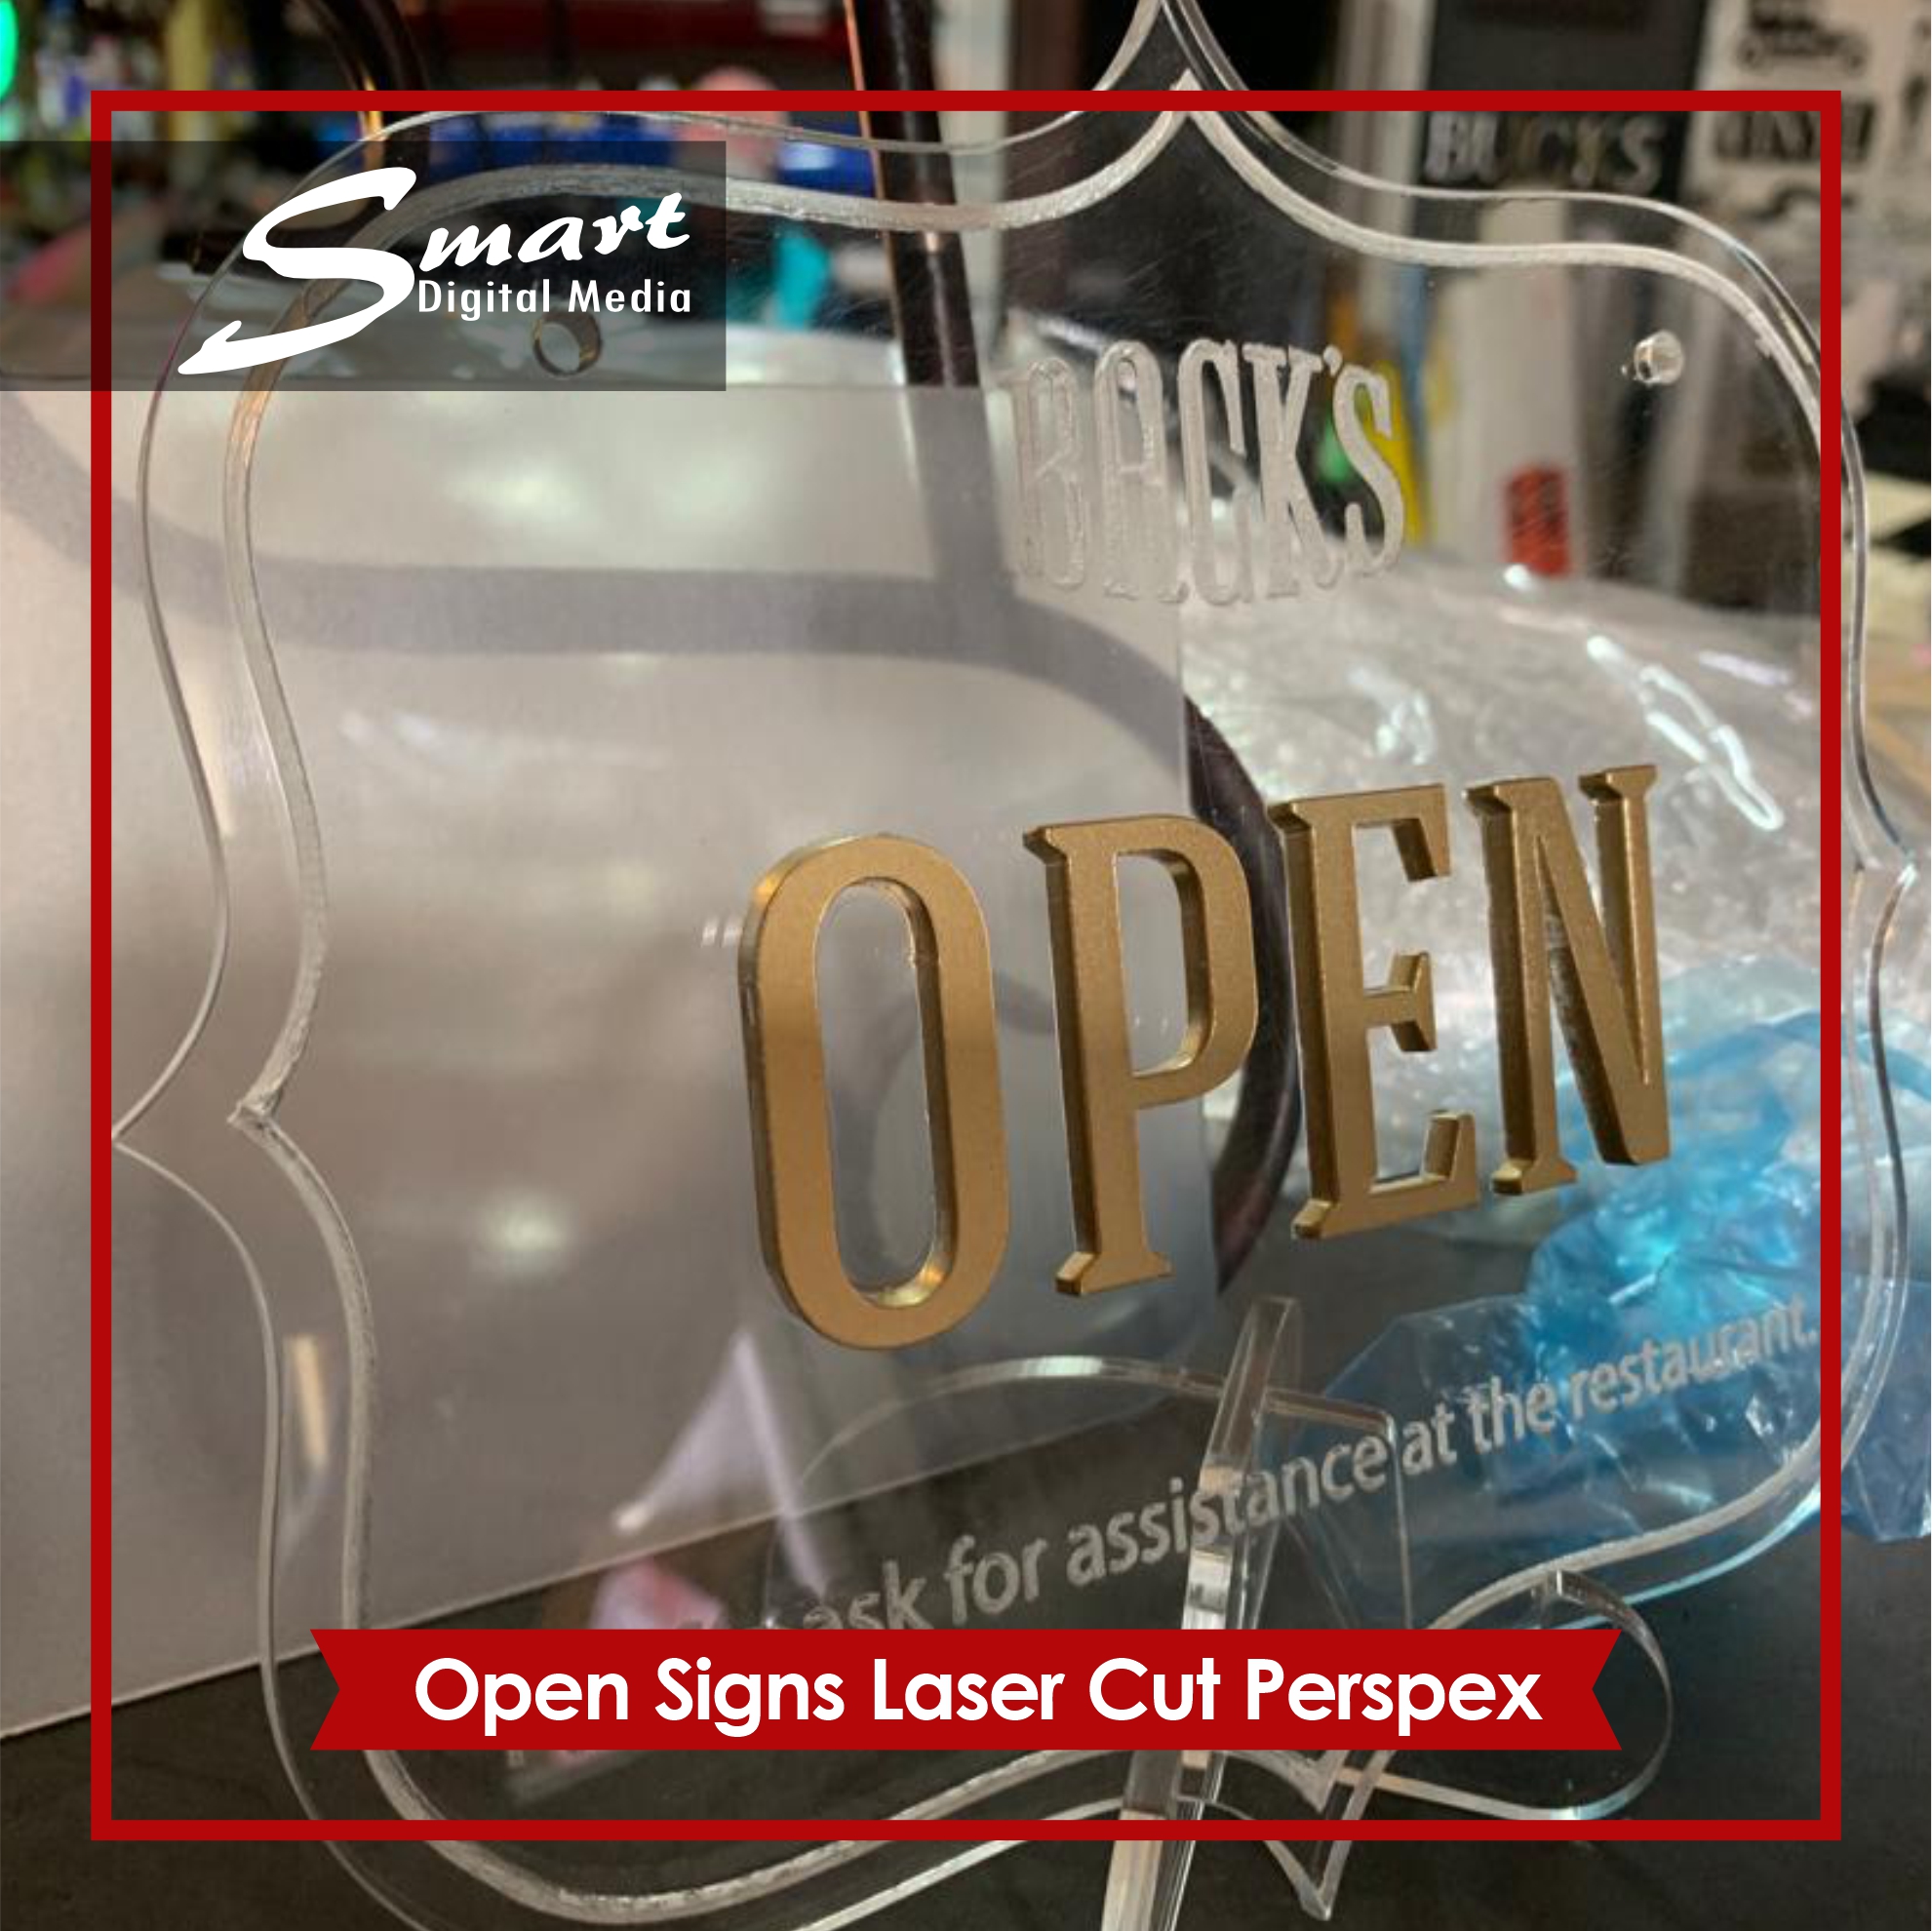 Open sign for Backs Restaurant. Laser cut from clear Perspex and feature gold lettering.